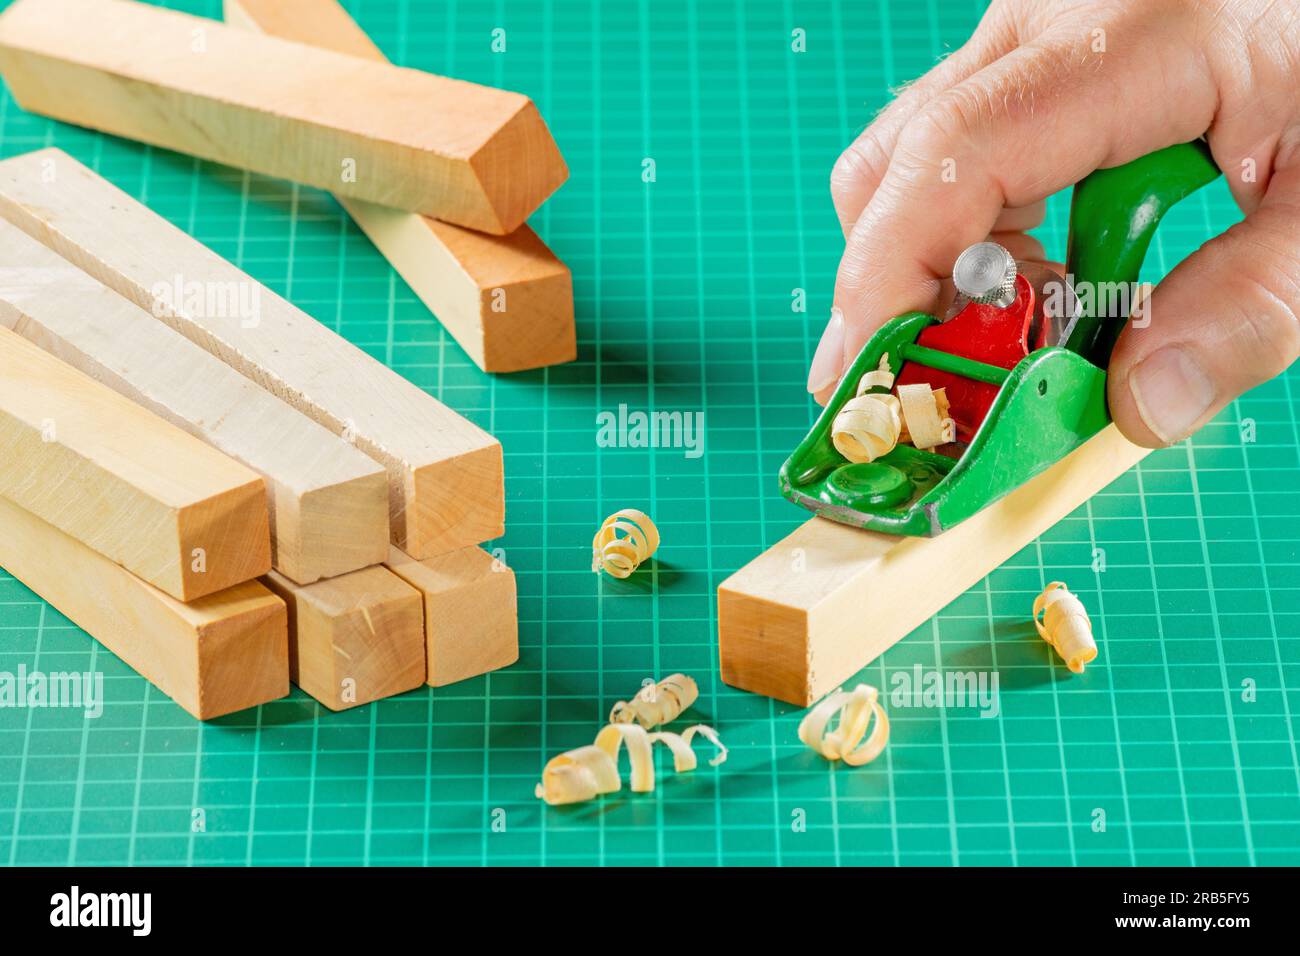 The modeler's hand cuts a block of boxwood with a miniplaner on a green model rug Stock Photo